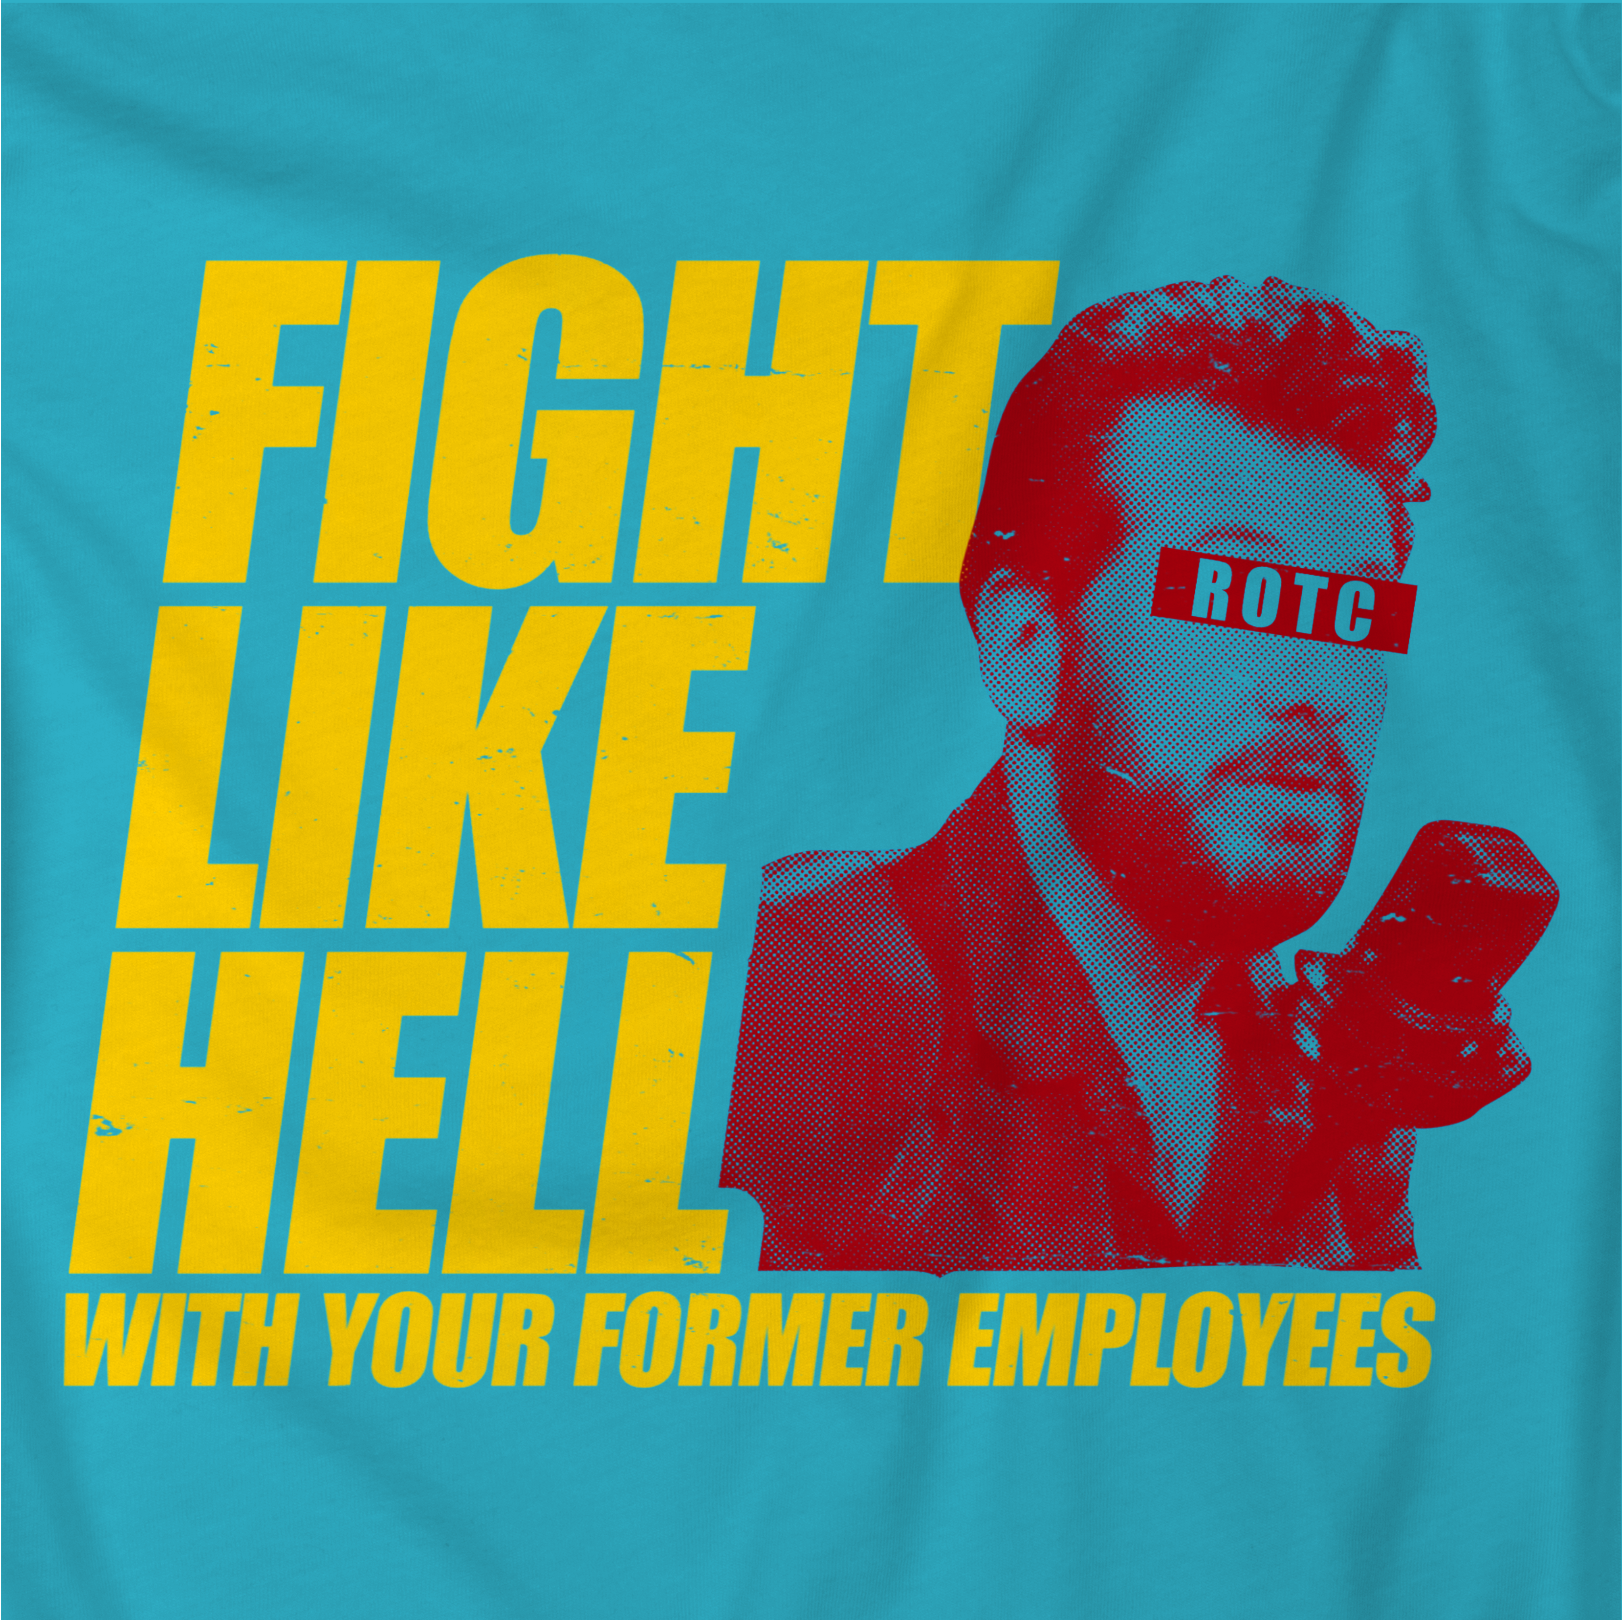 FIGHT LIKE HELL with your former employees